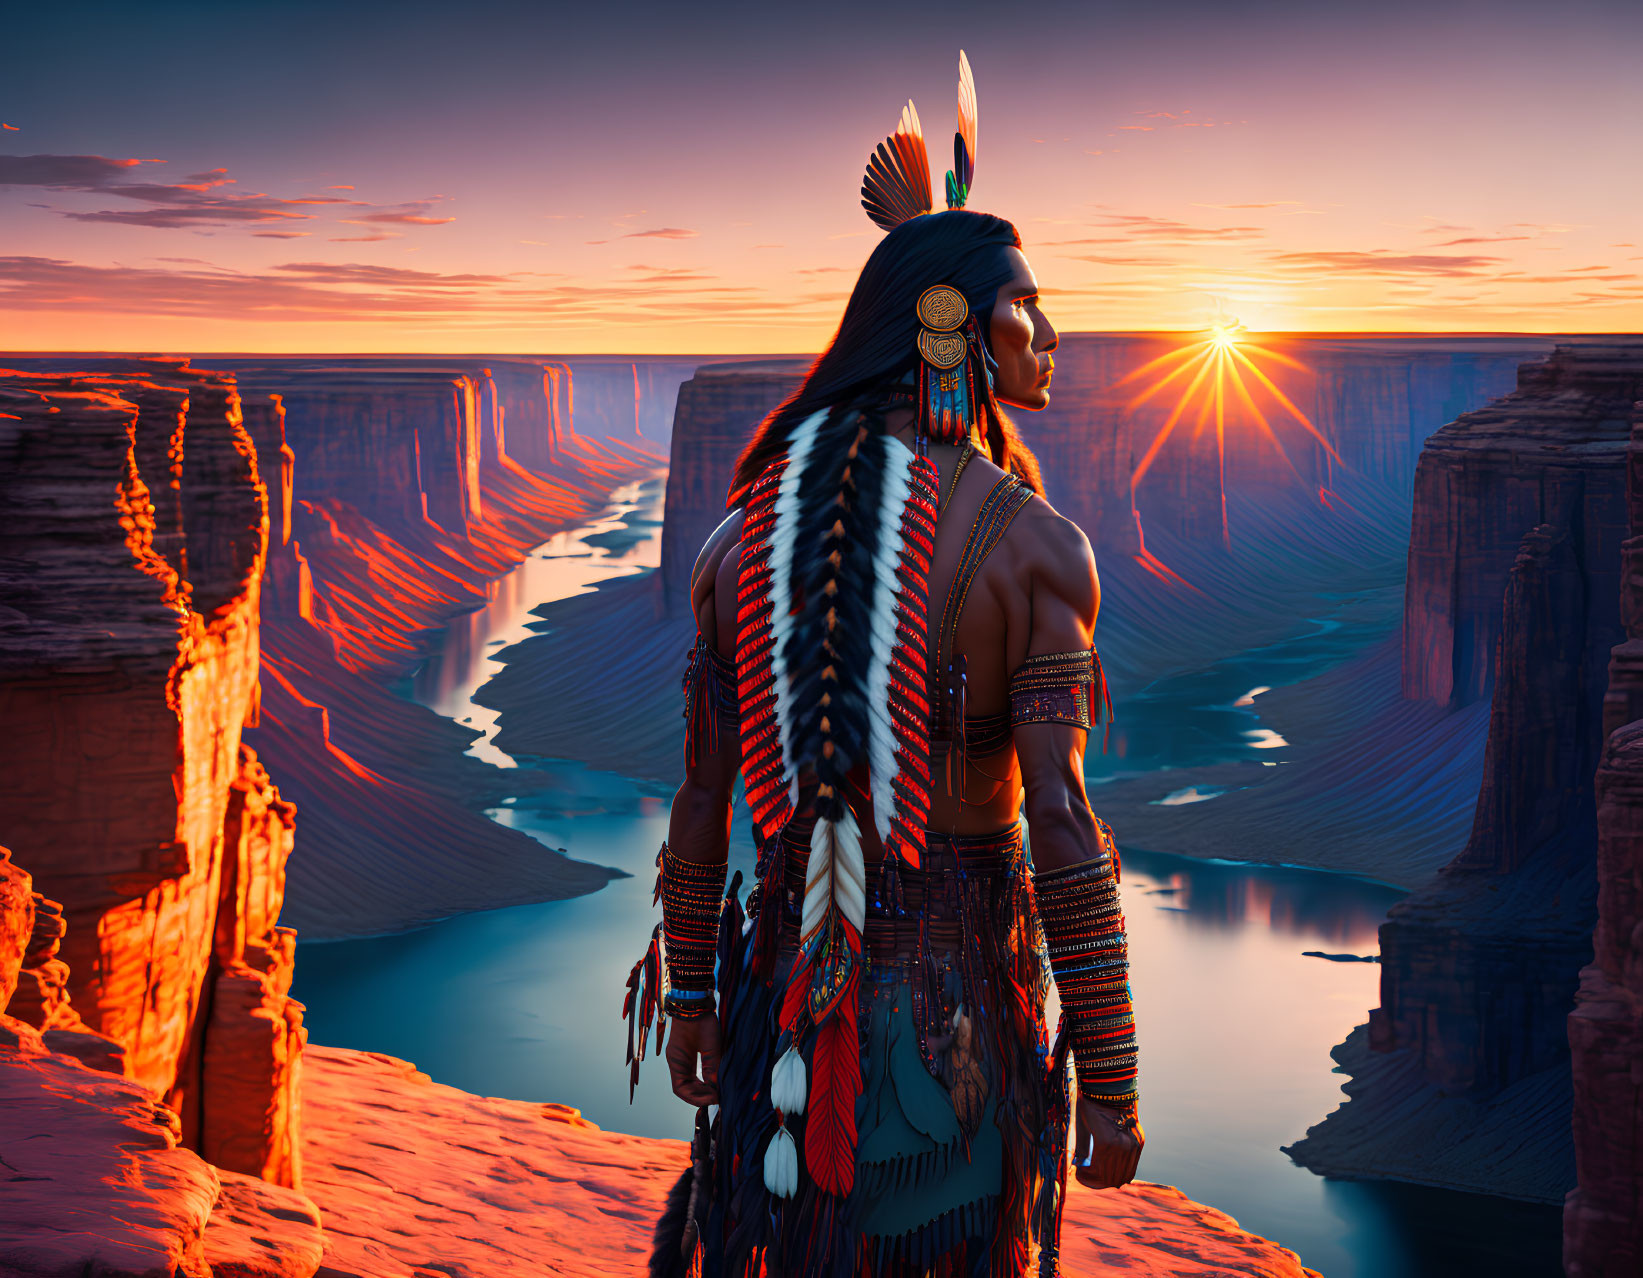 Native American Figure in Traditional Attire Overlooking Canyon at Sunset